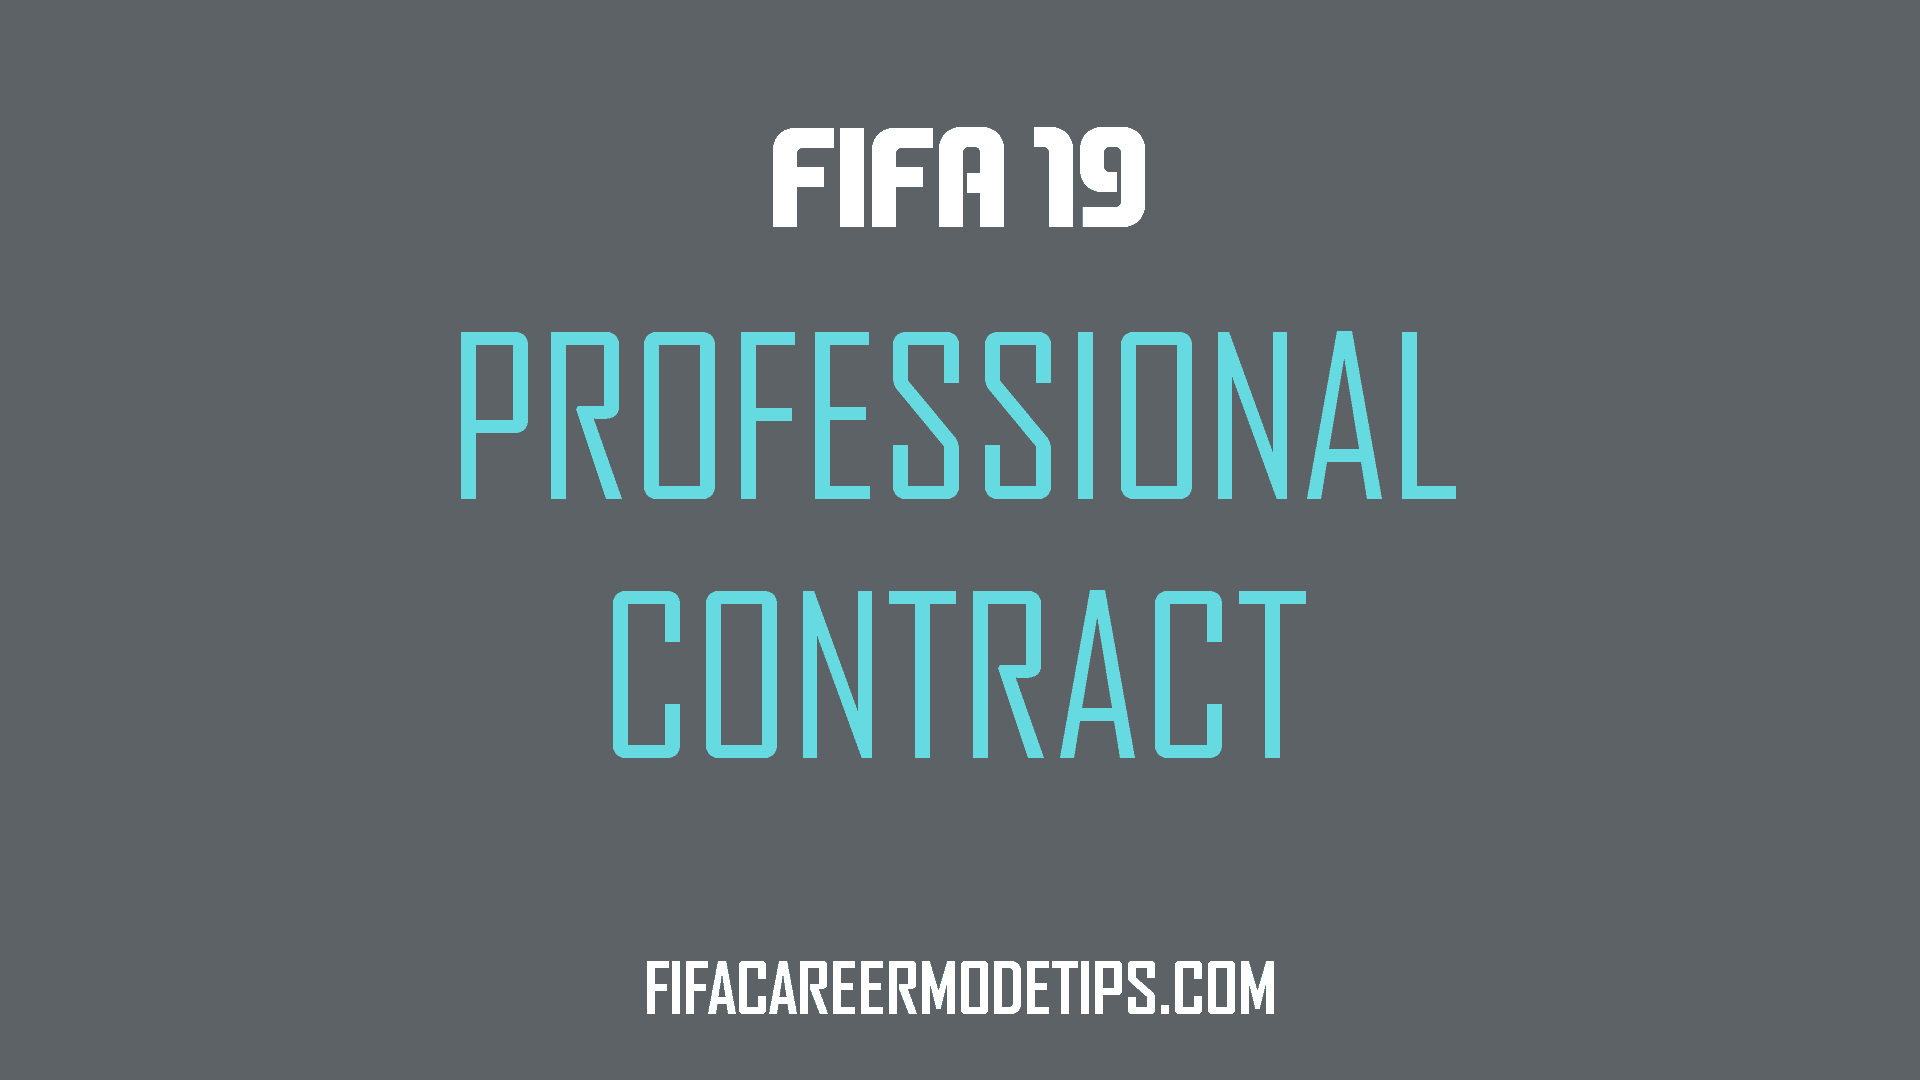 Youth Players Professional Contract in FIFA 19